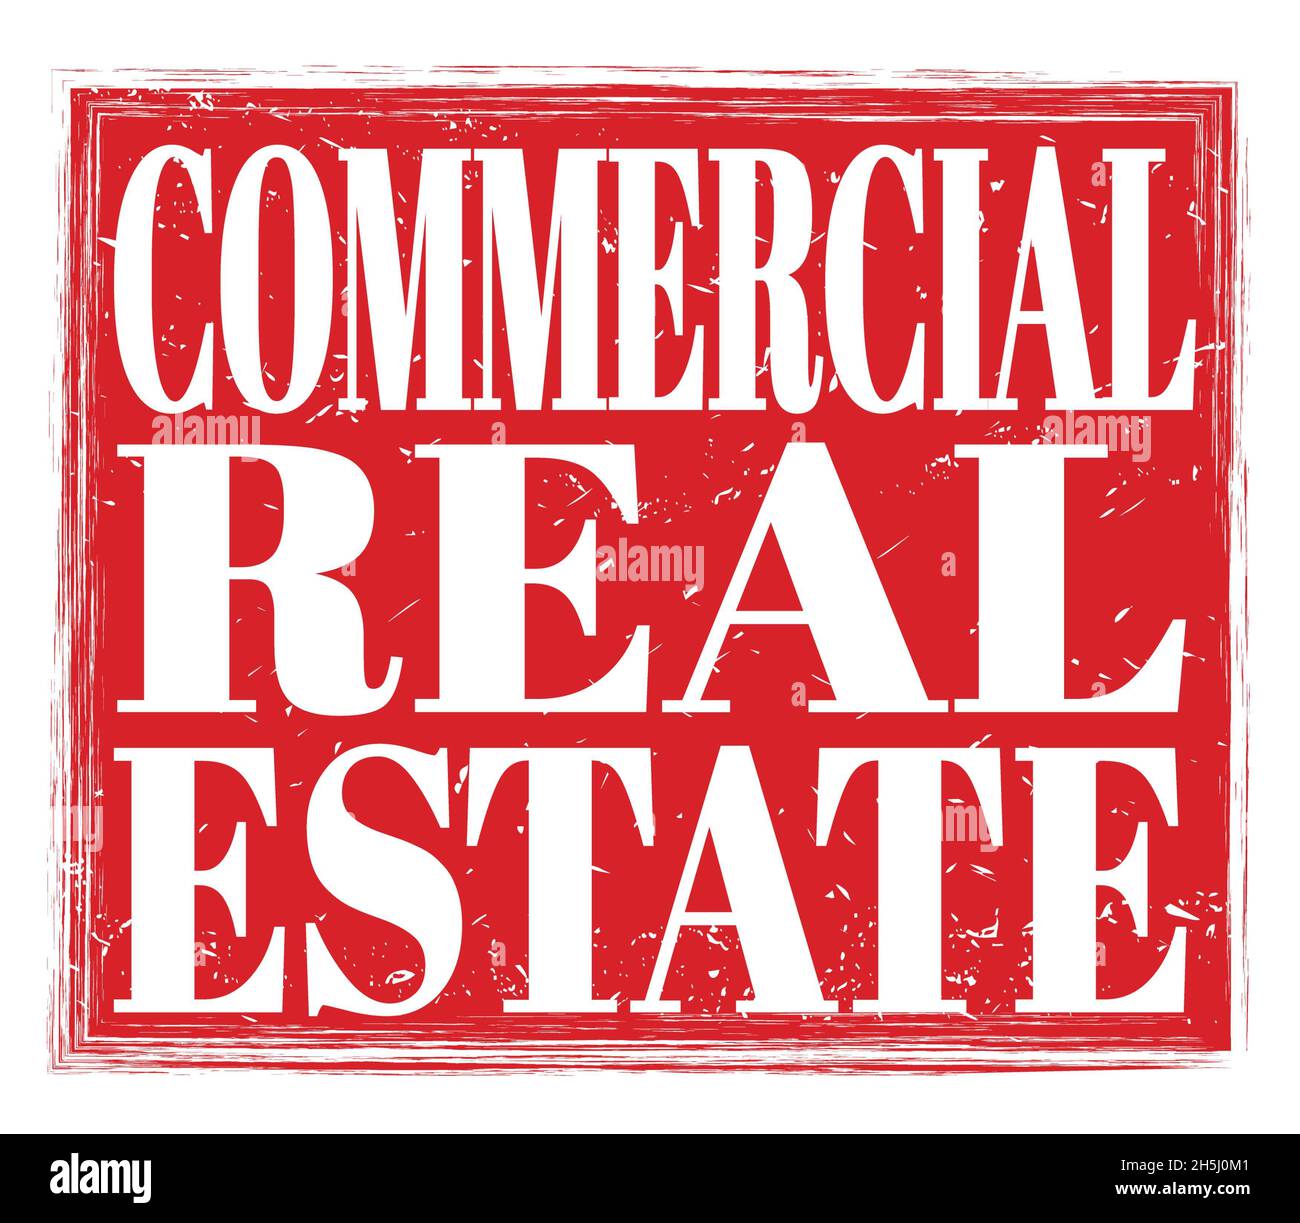 COMMERCIAL REAL ESTATE, written on red grungy stamp sign Stock Photo